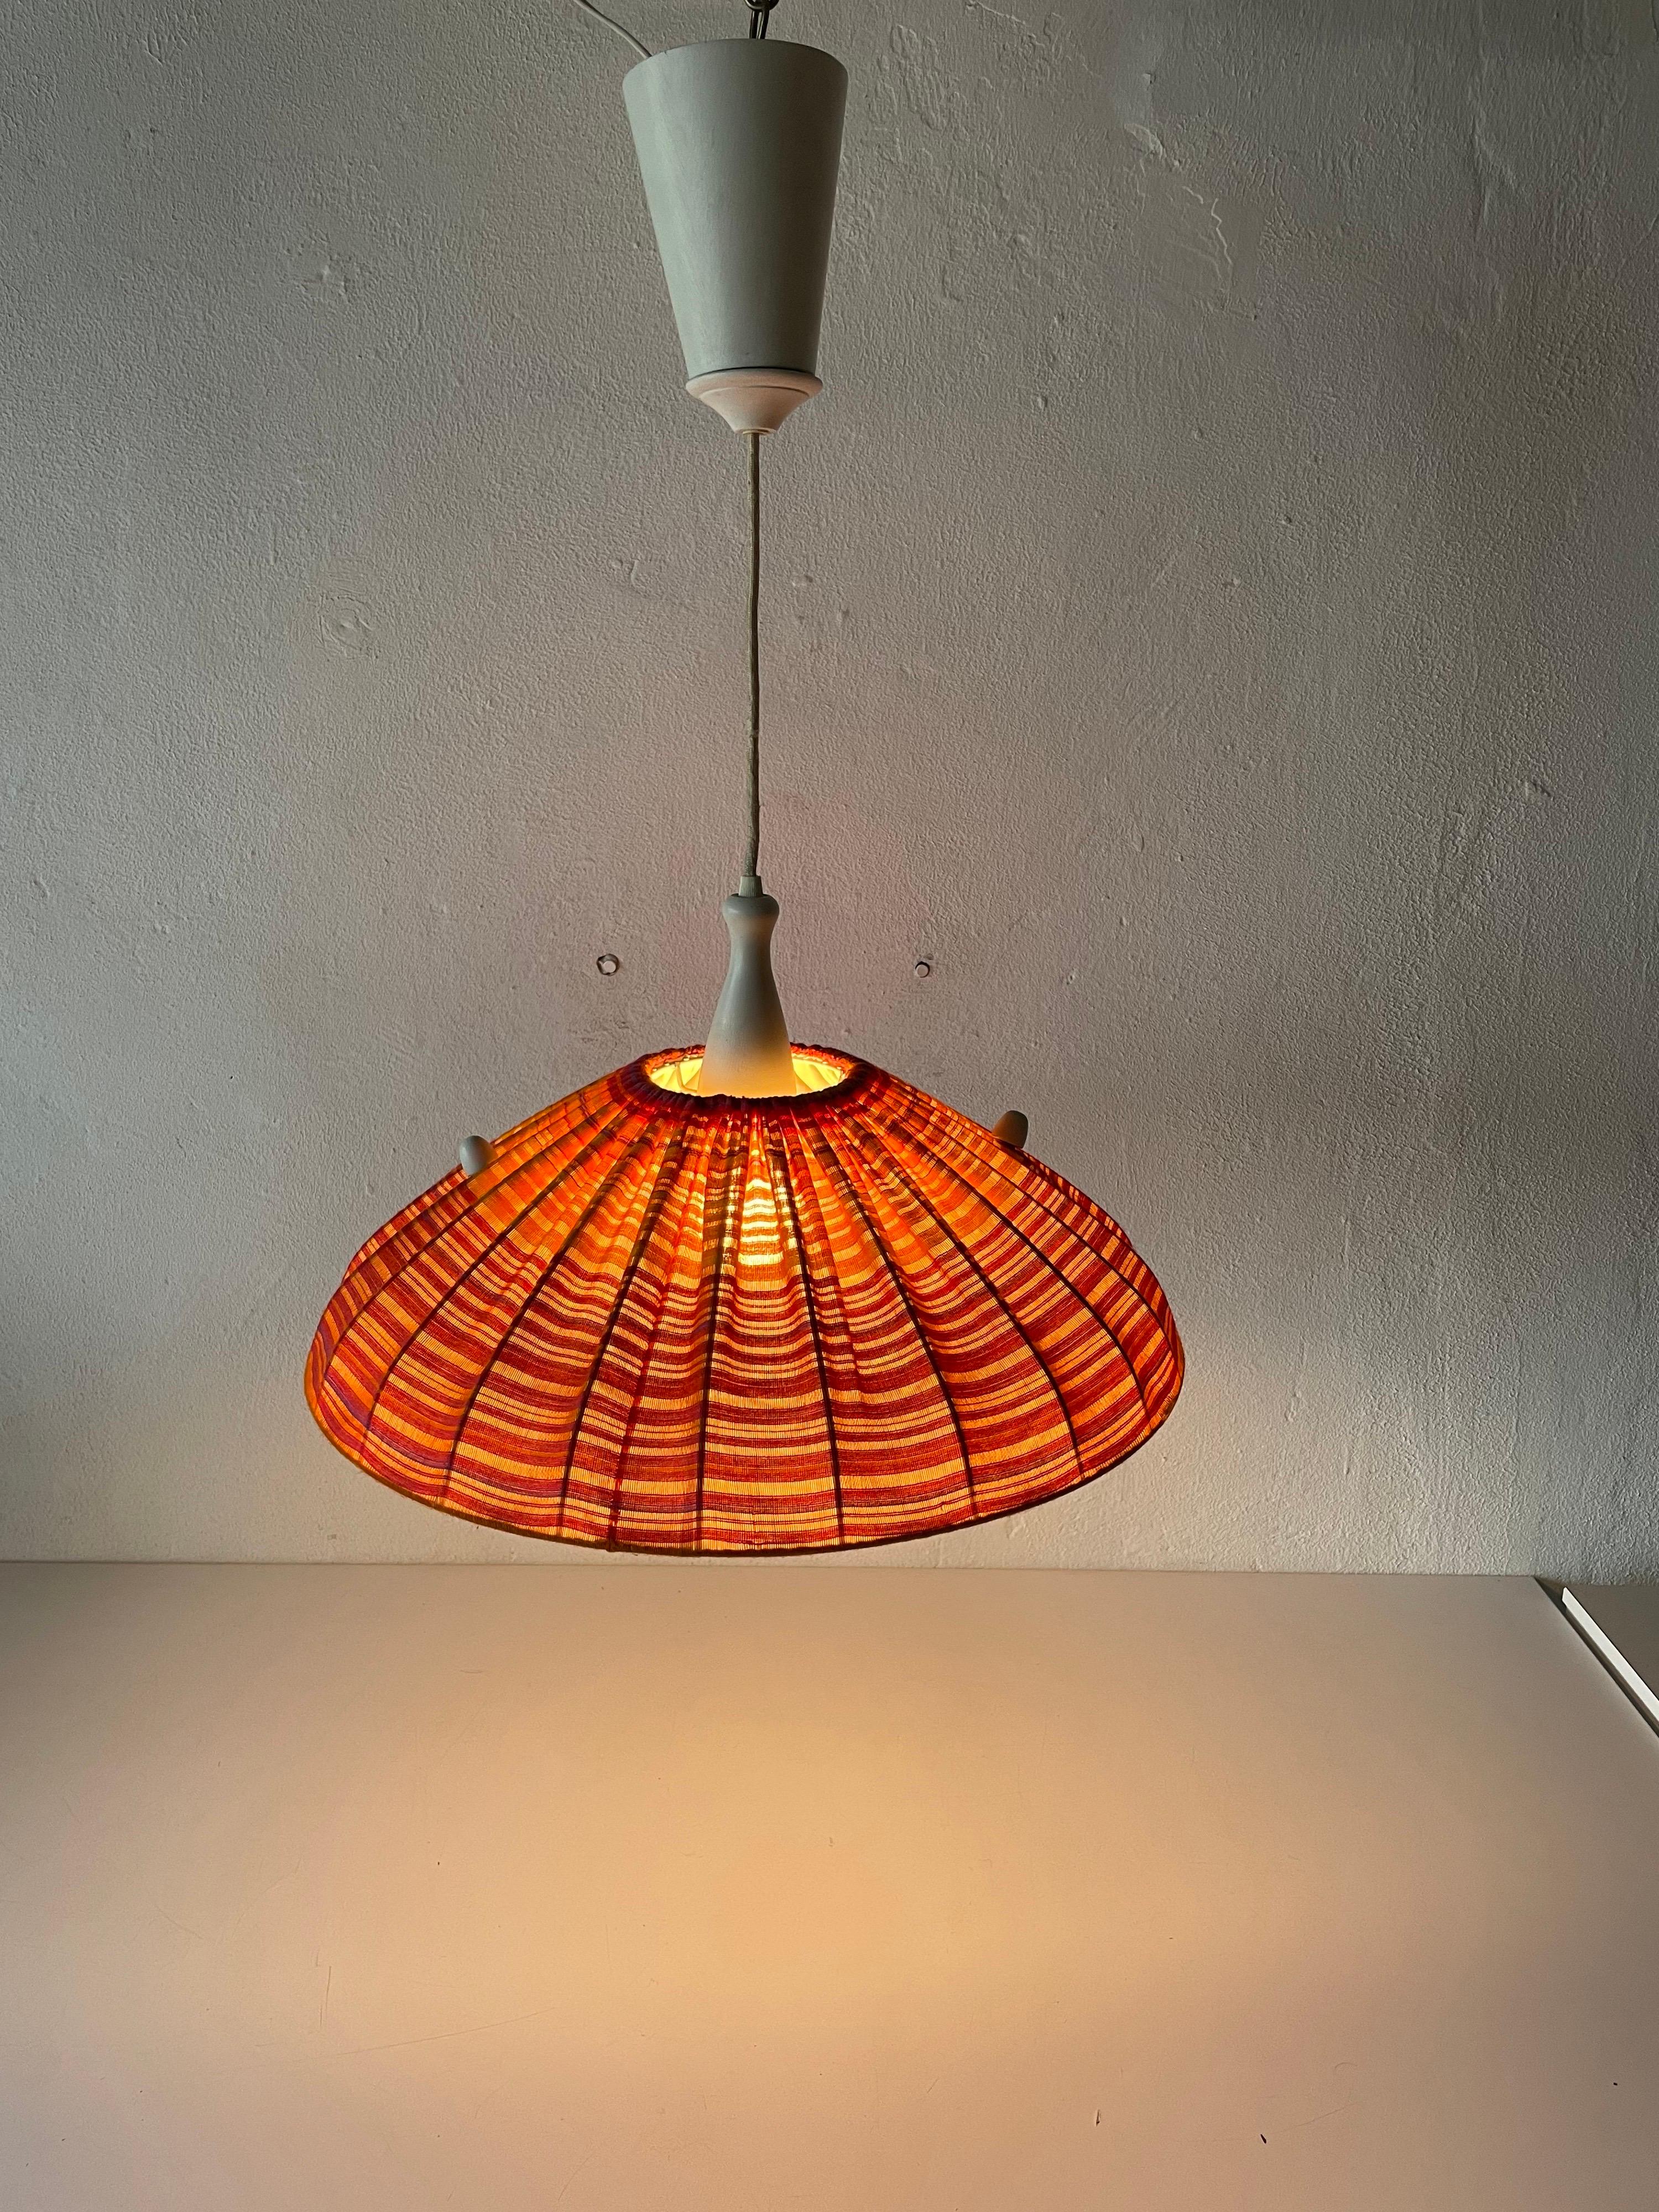 Fabric Shade & Wood Large Pendant Lamp by Temde, 1960s, Germany For Sale 8